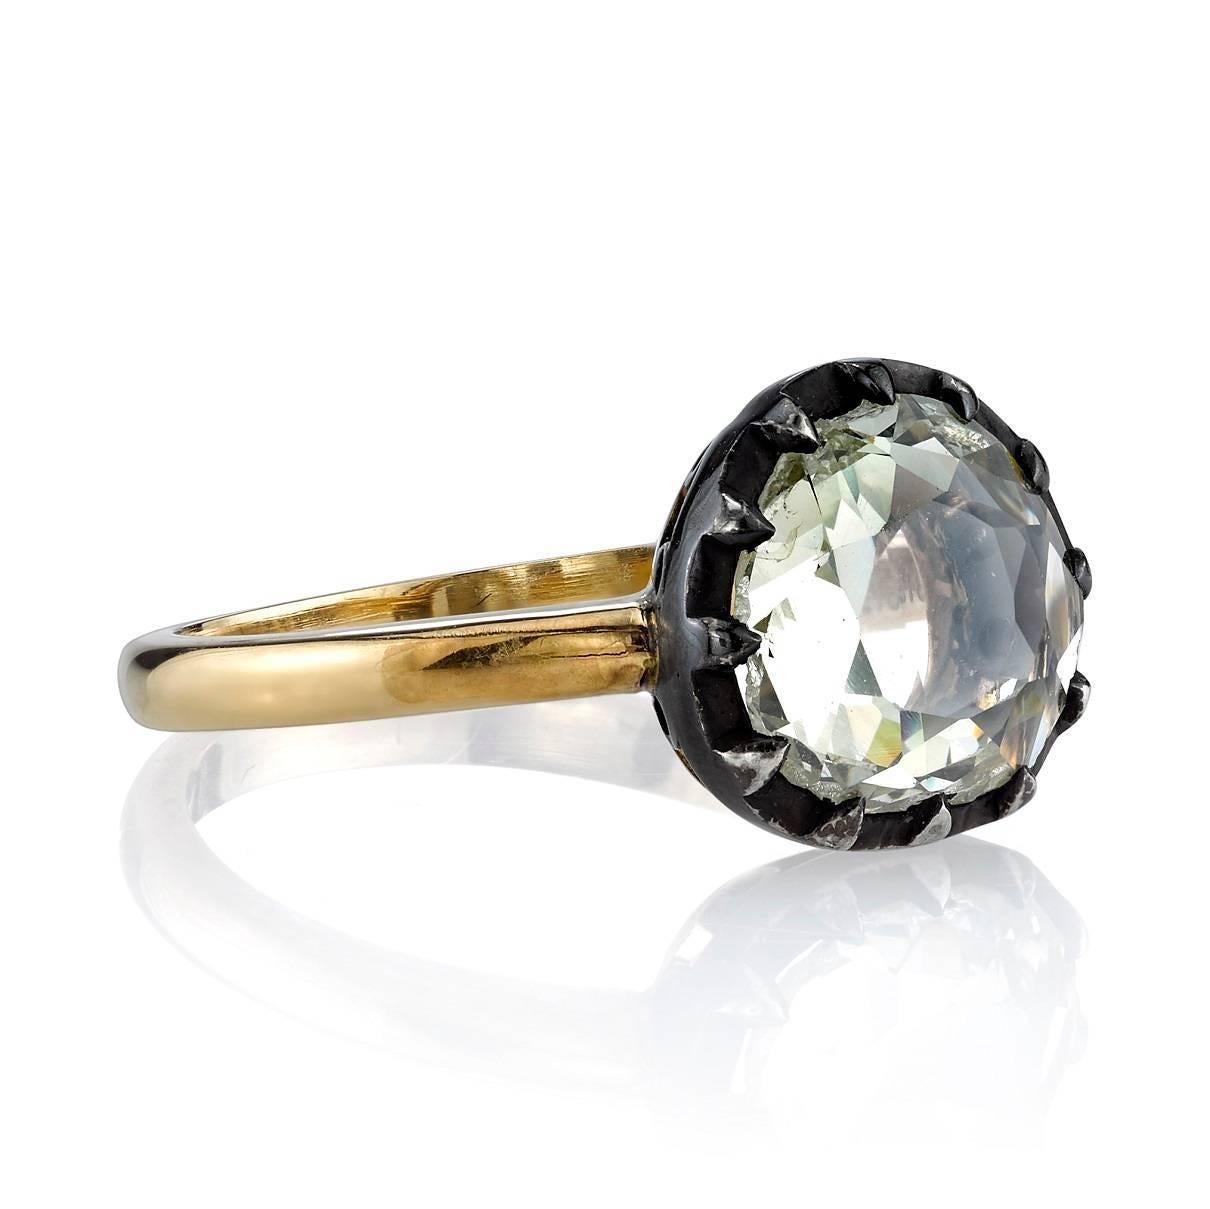 1.53ct vintage Rose cut diamond set in an 18k yellow gold and silver mounting. This one of a kind stone is set in a beautiful low profile design. 